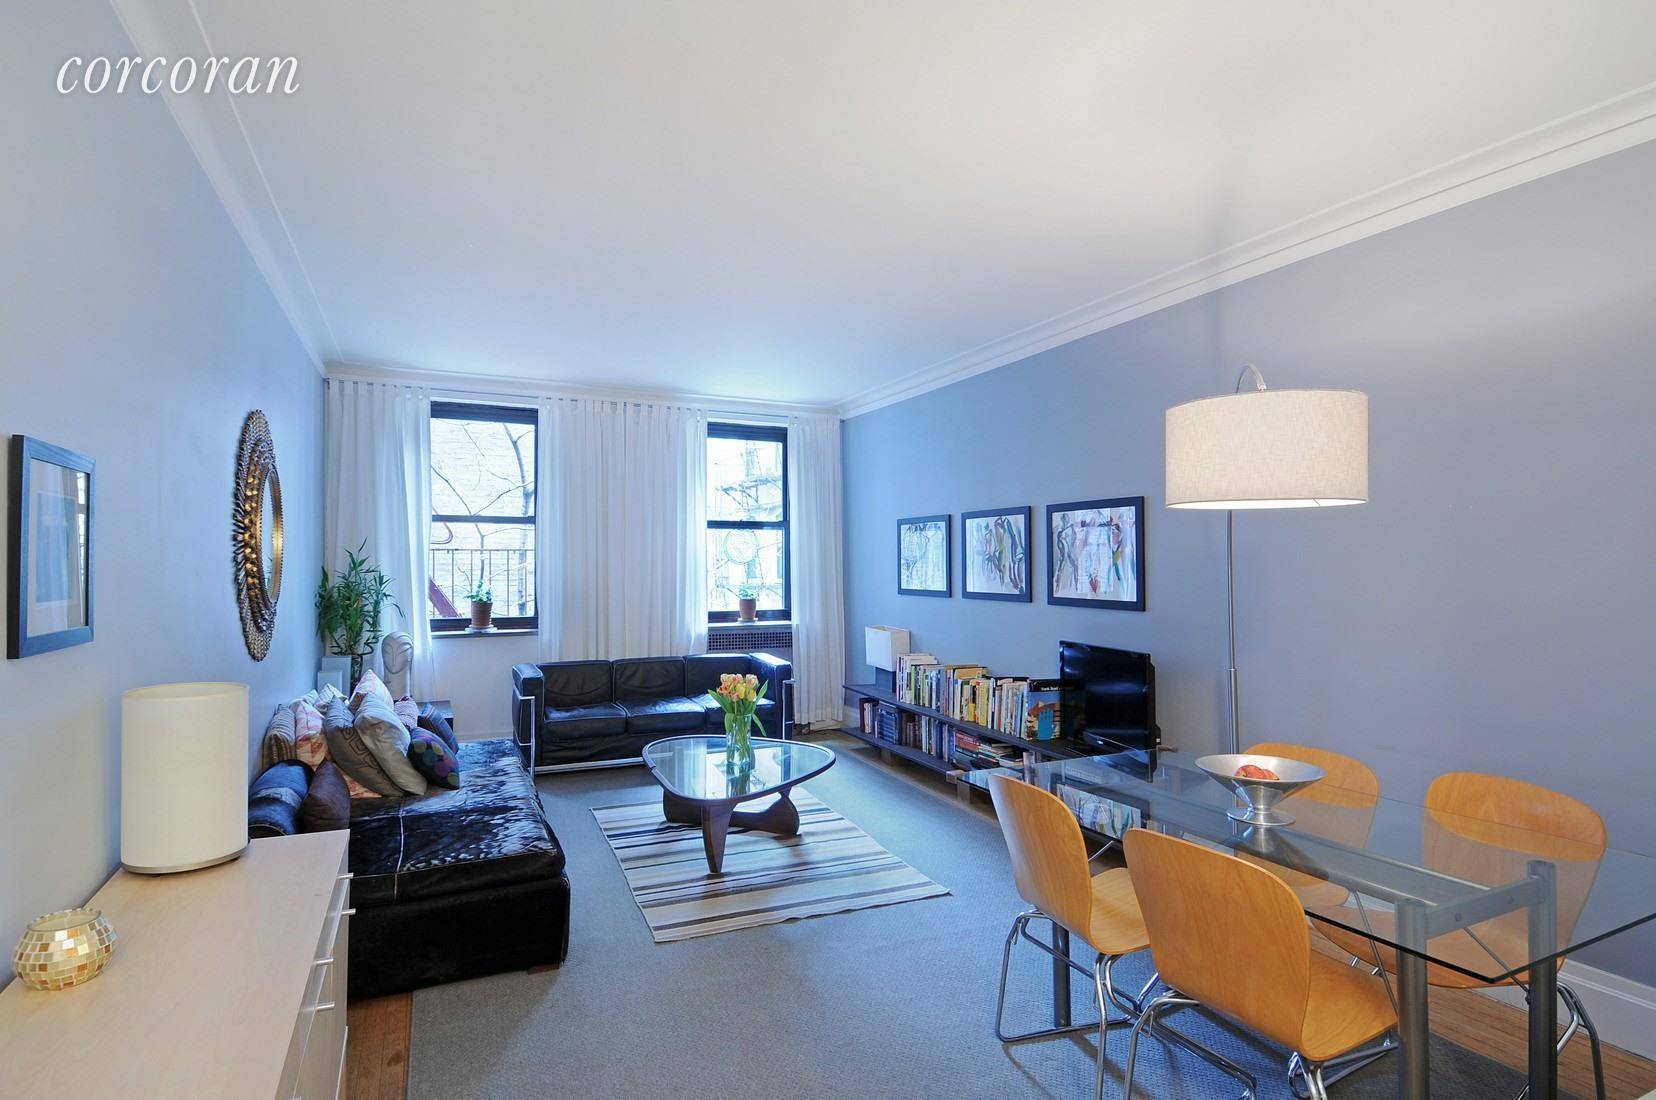 Lovingly renovated on Central Park West, including high ceilings and newly refinished hardwood floors.